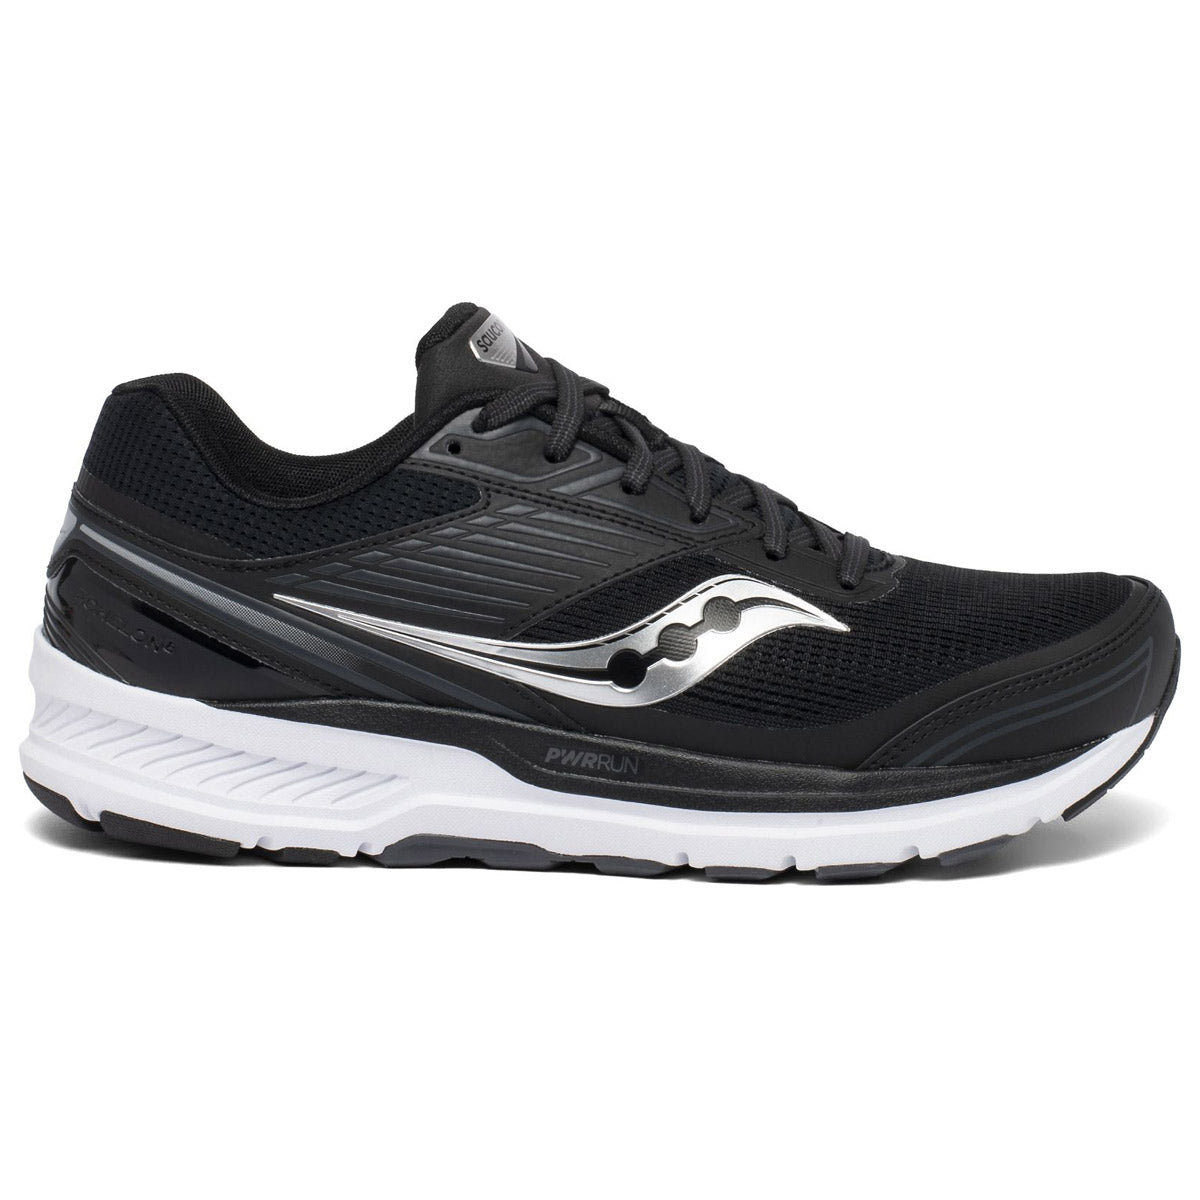 A black and white Saucony Echelon 8 running shoe with a cushioned sole and a wave-like logo on the side.